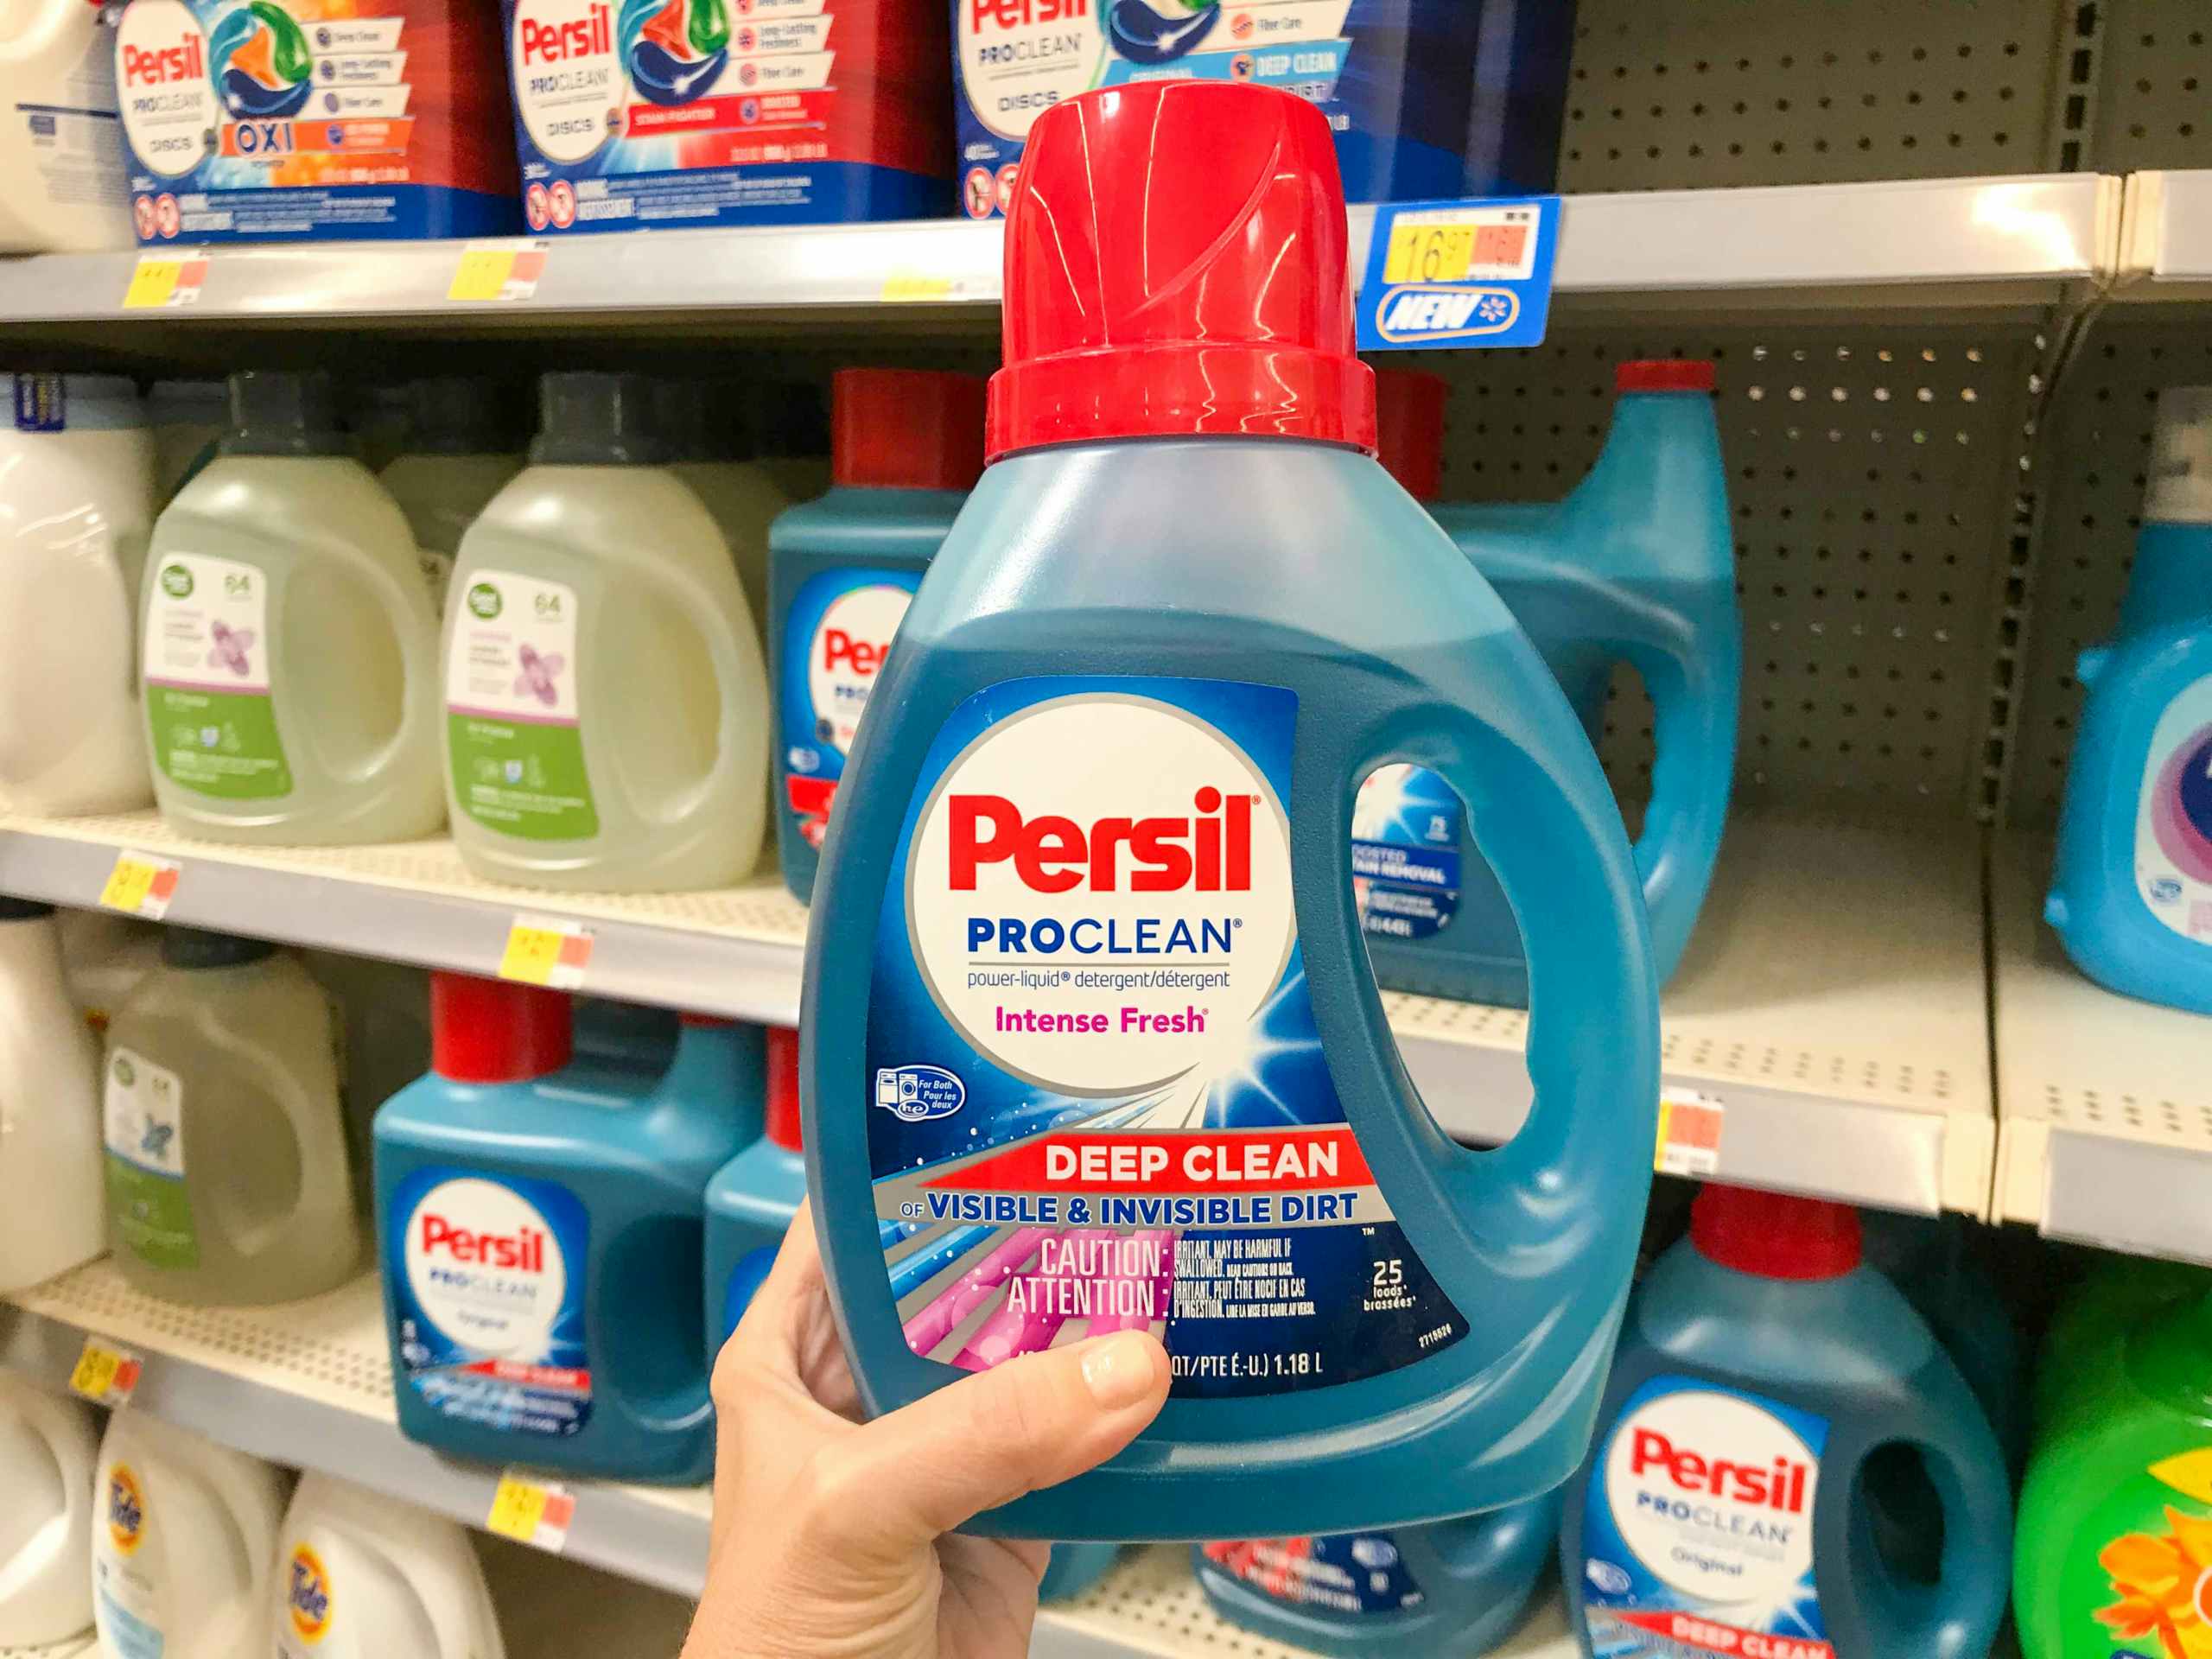 Persil Proclean Laundry Detergent at Walmart